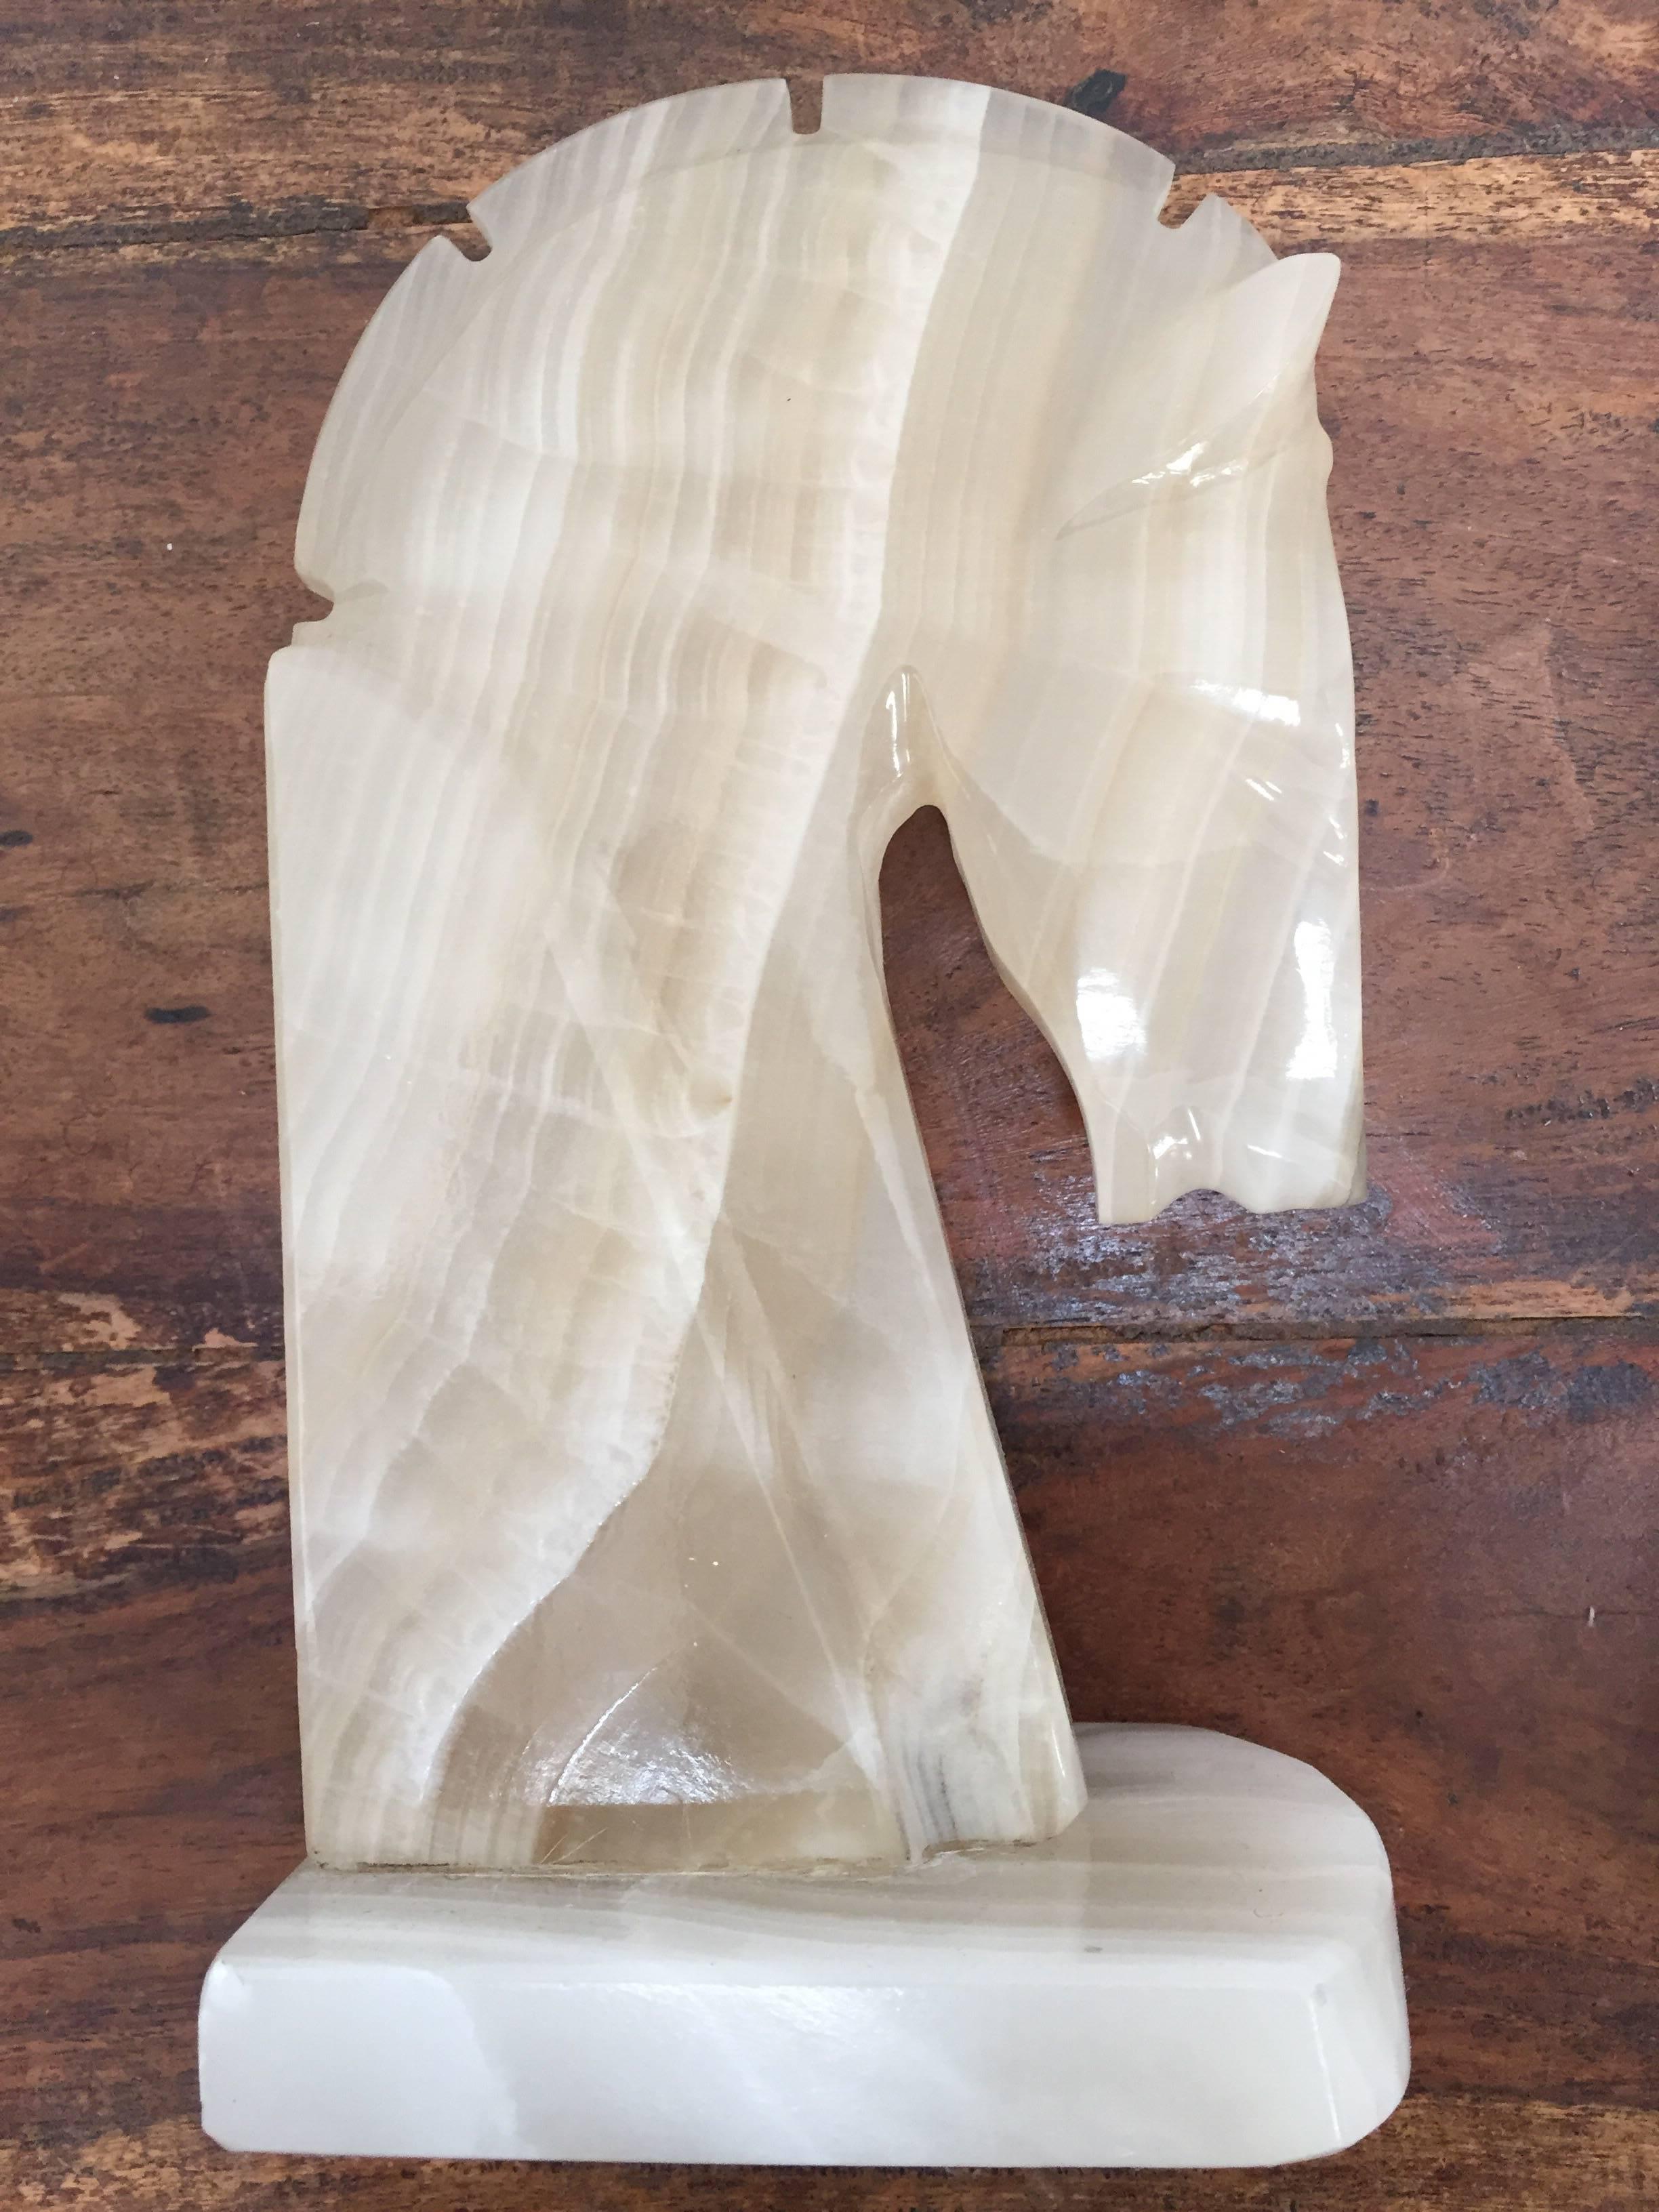 20th Century Pair of Art Deco Onyx Horses Heads Bookends Made in Italy